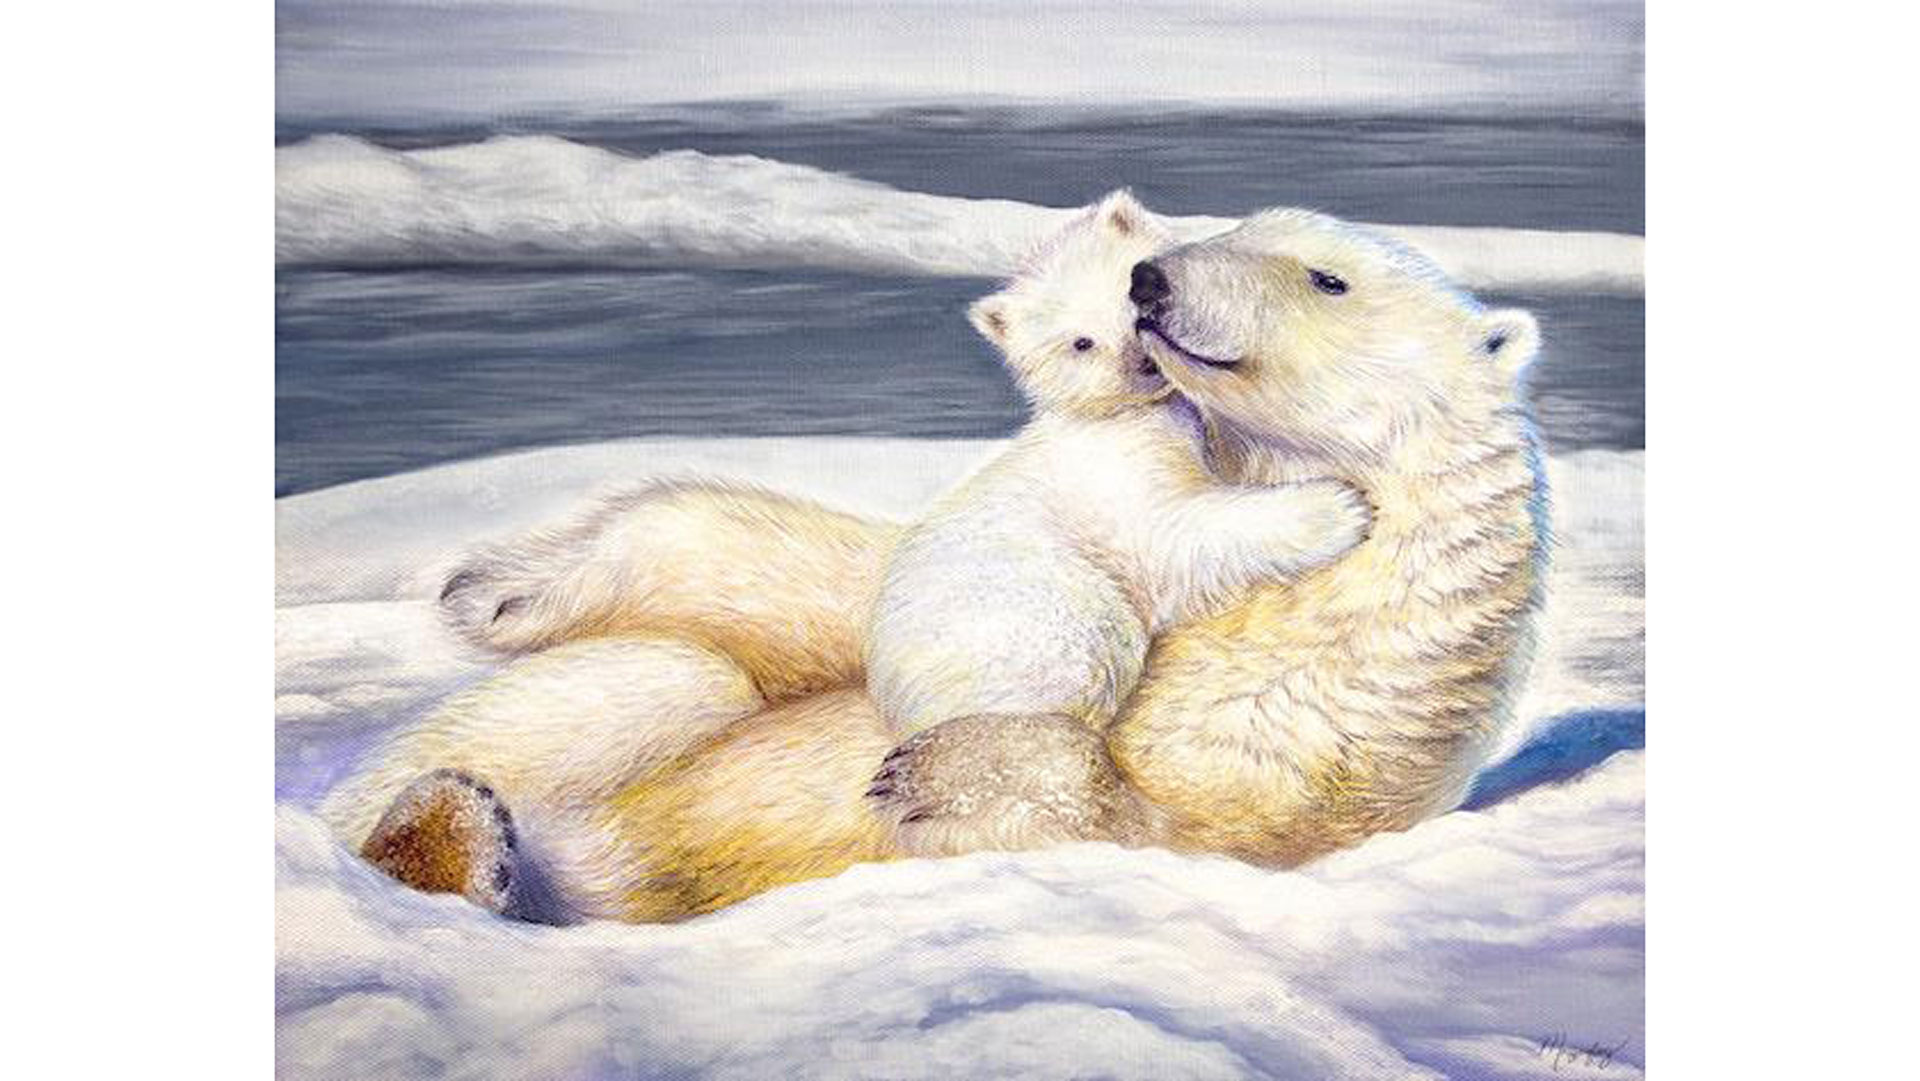 Painting of polar bear with cub rolling in snow.